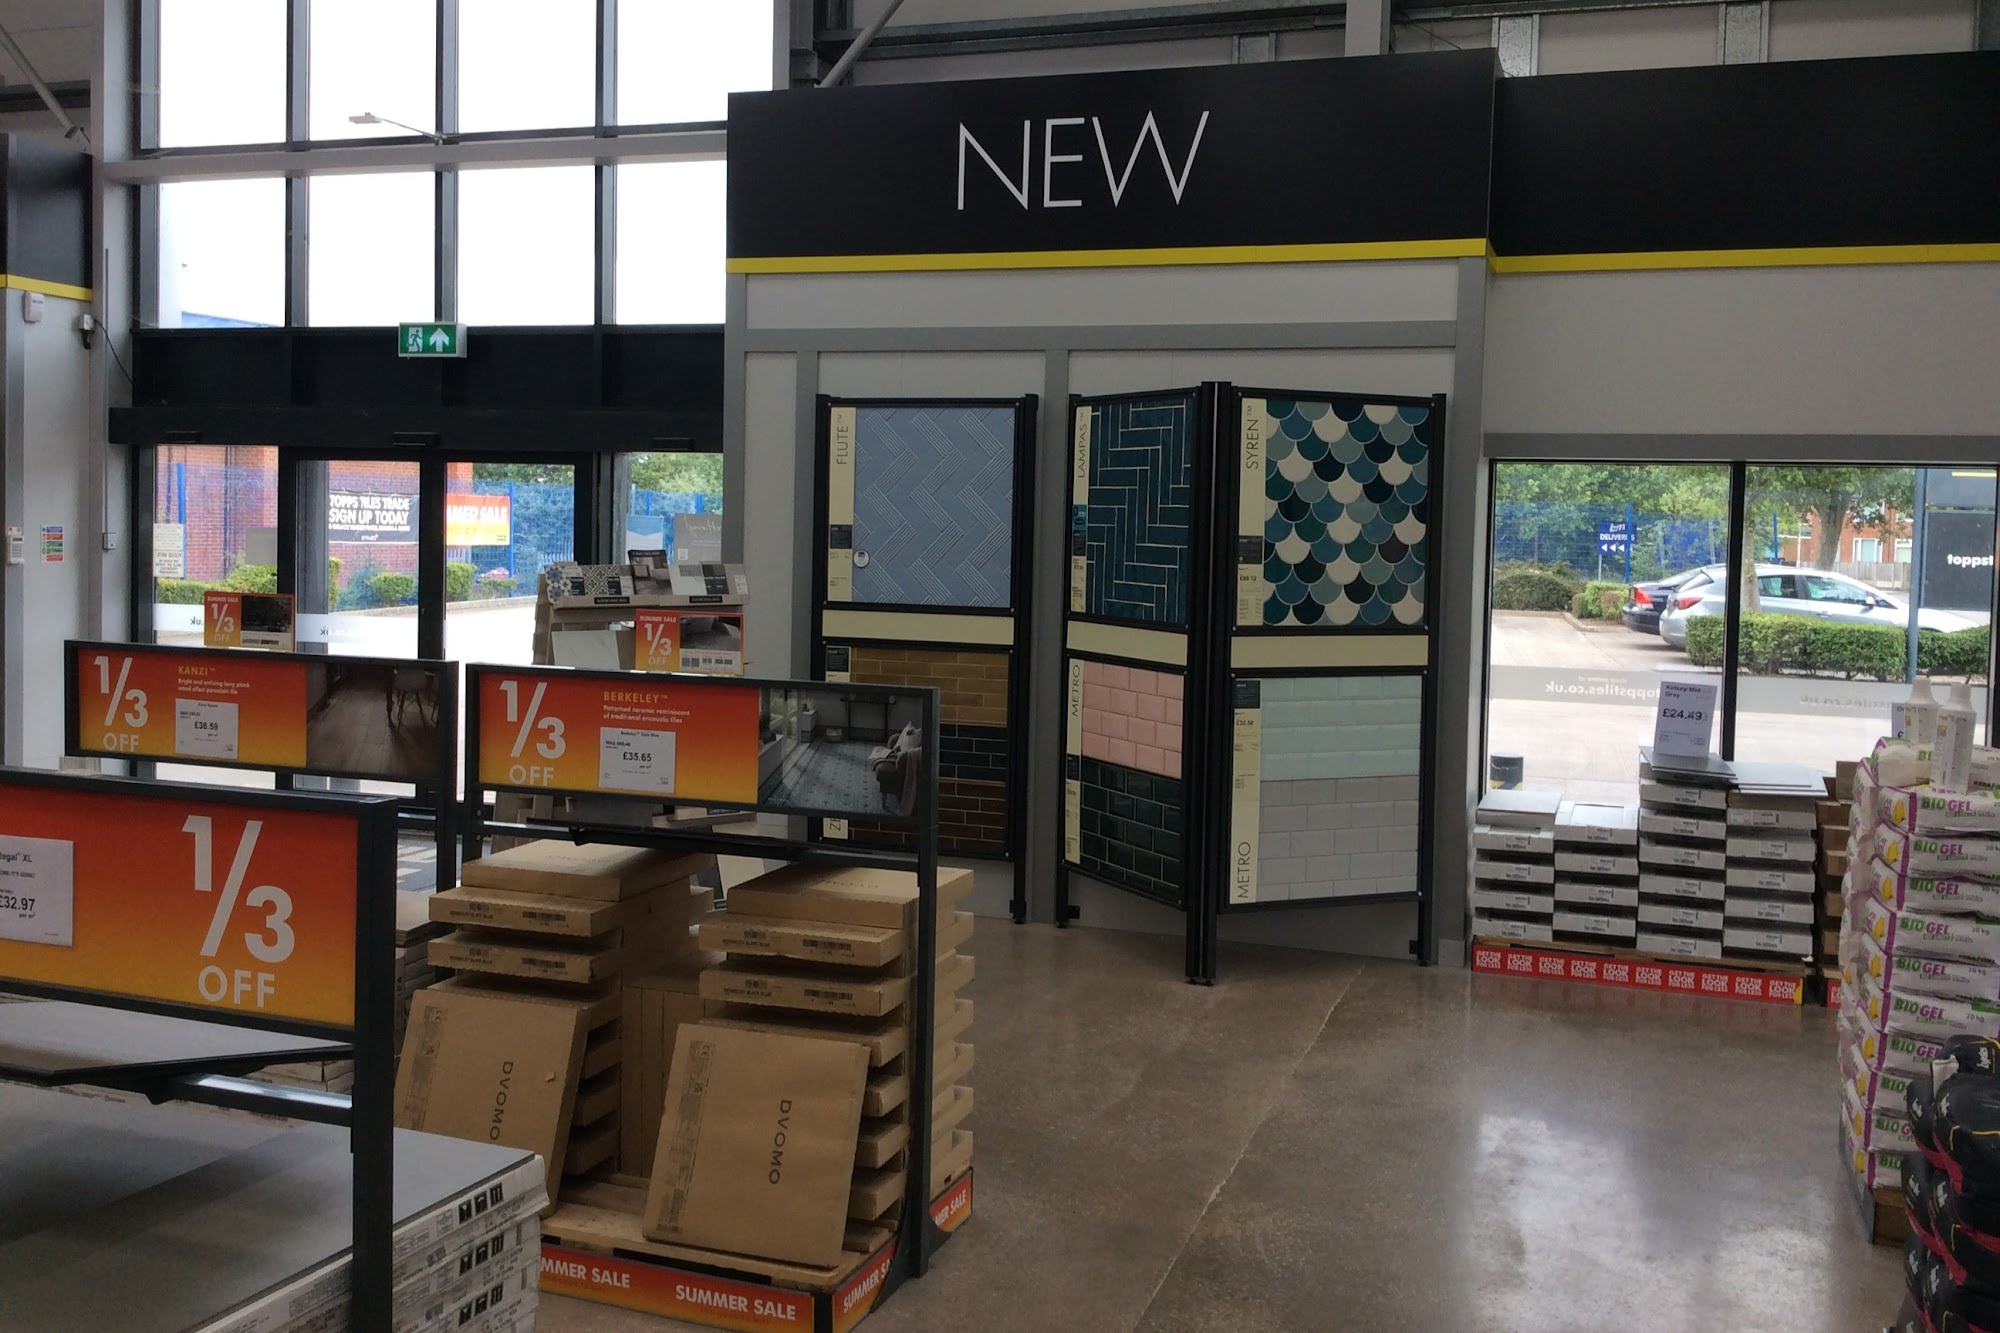 Topps Tiles Mansfield - SUPERSTORE